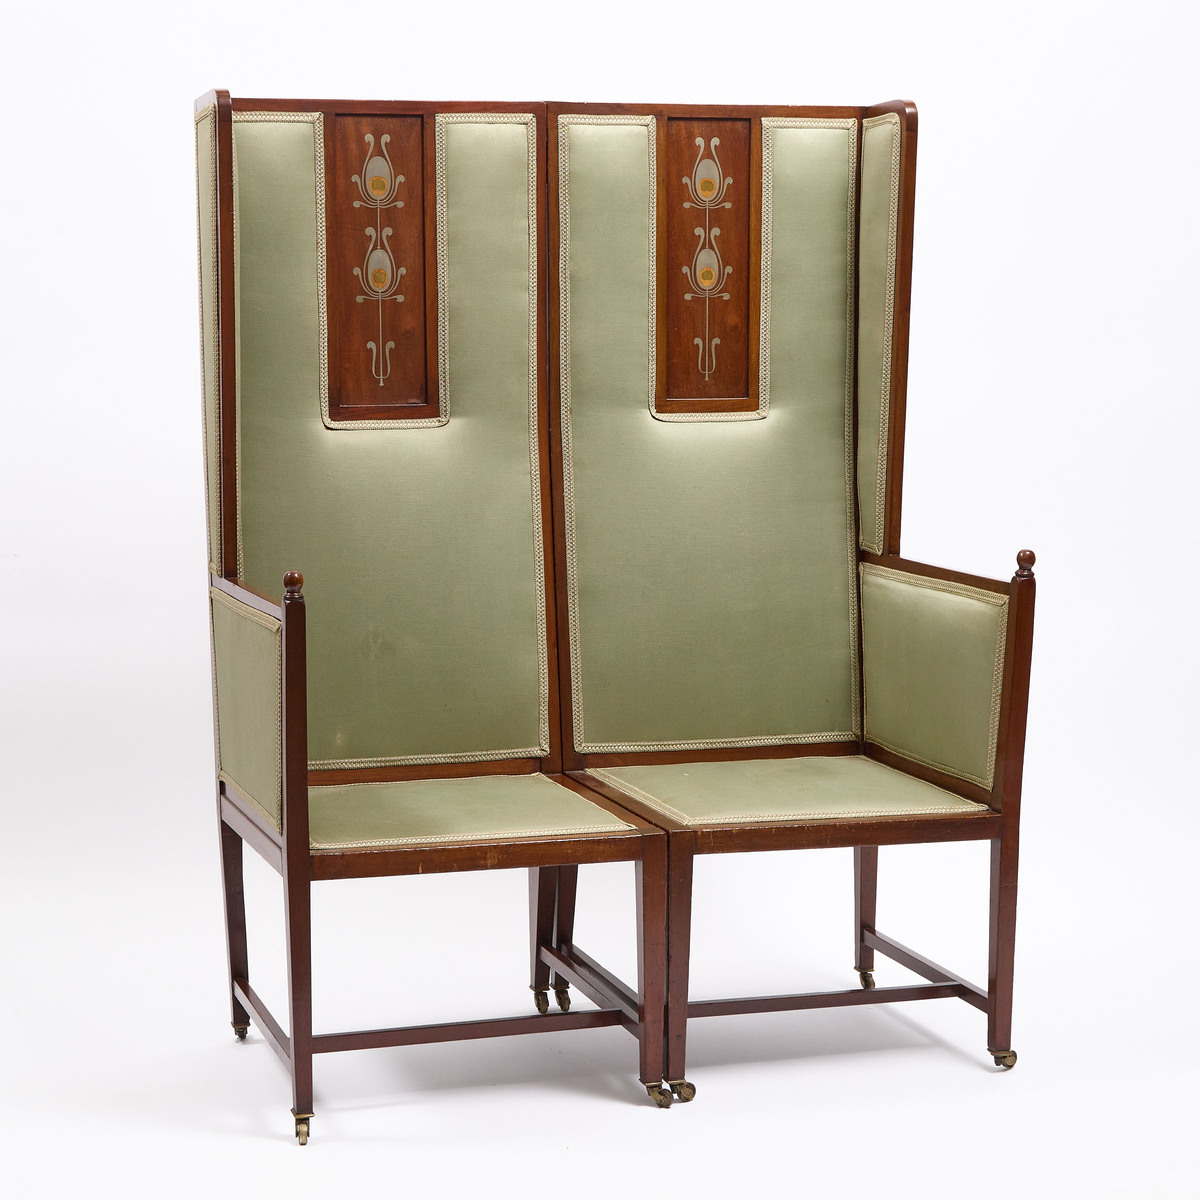 George Logan for Wylie and Lochhead Pewter and Brass Inlaid Mahogany Folding Settle, c.1900, 55.5 x